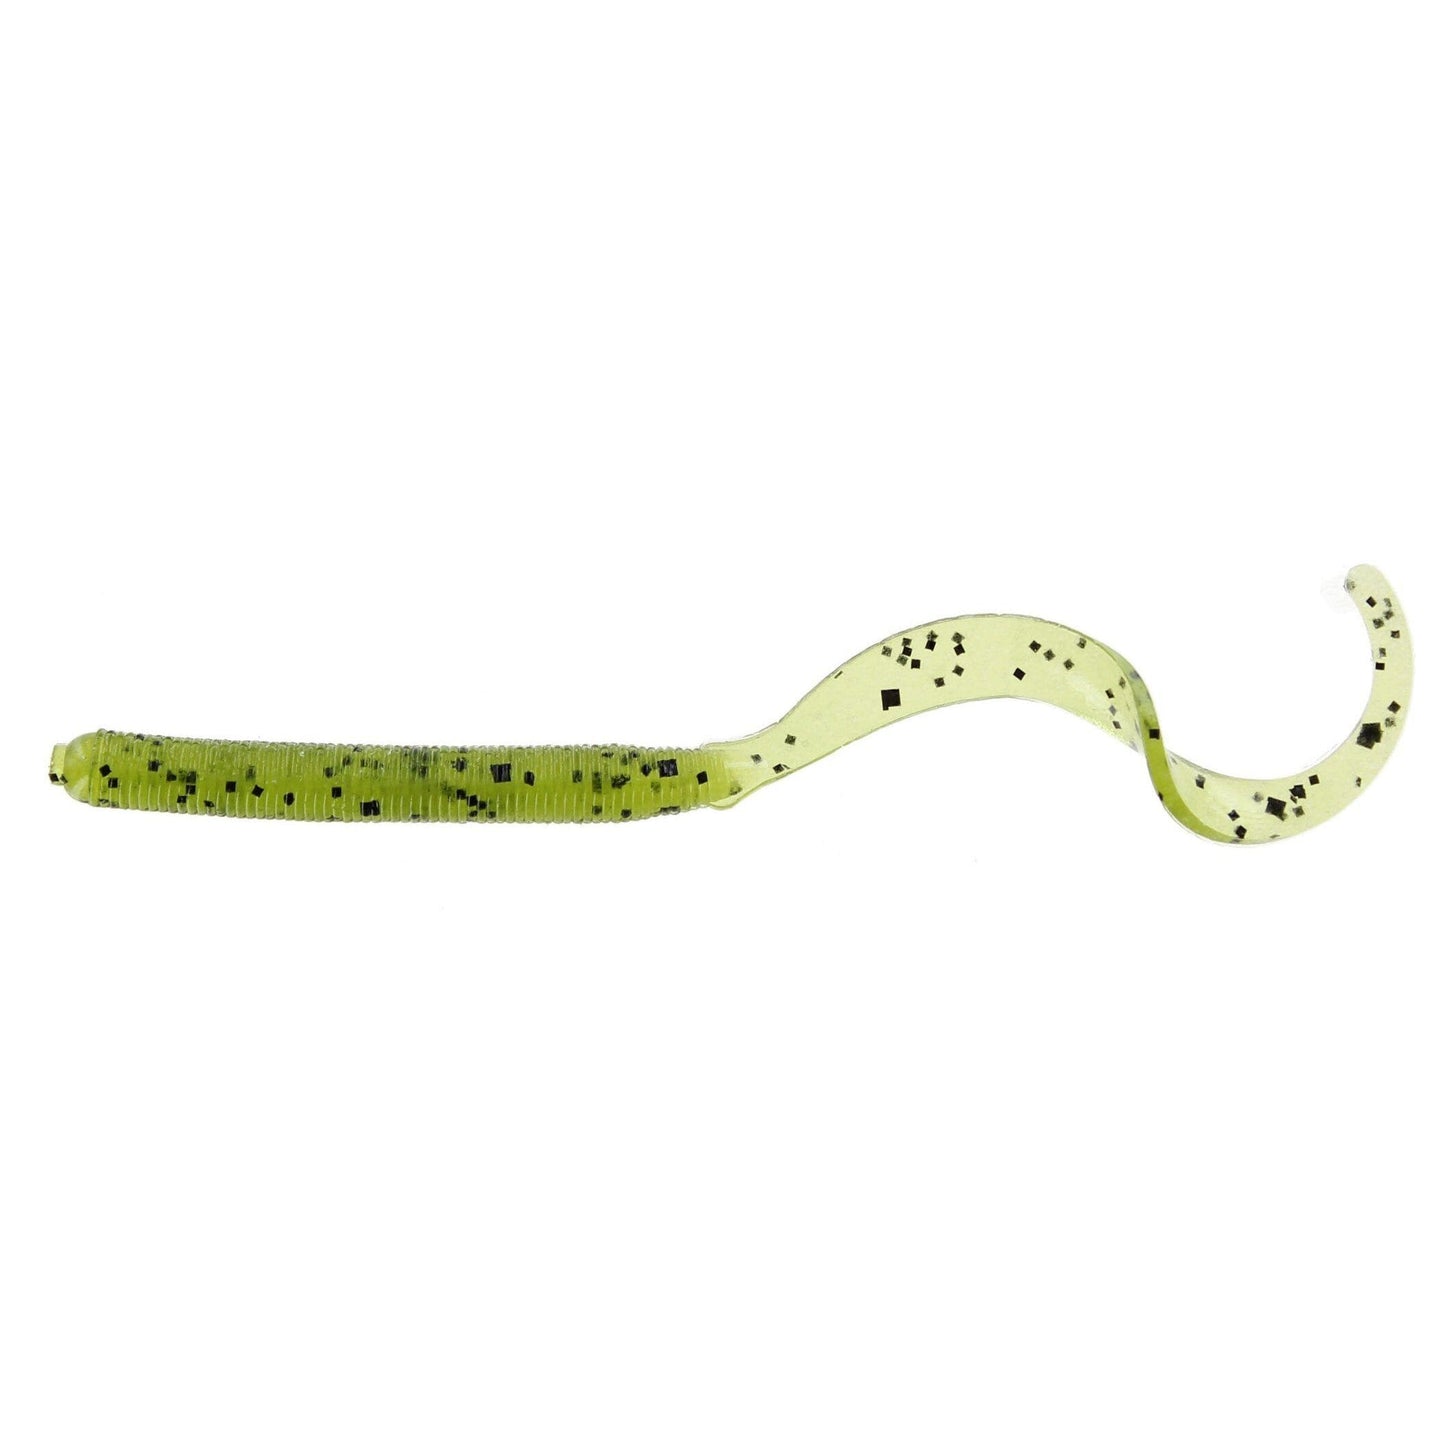 Zoom Curly Tail 4'' Watermelon Seed 20Pk